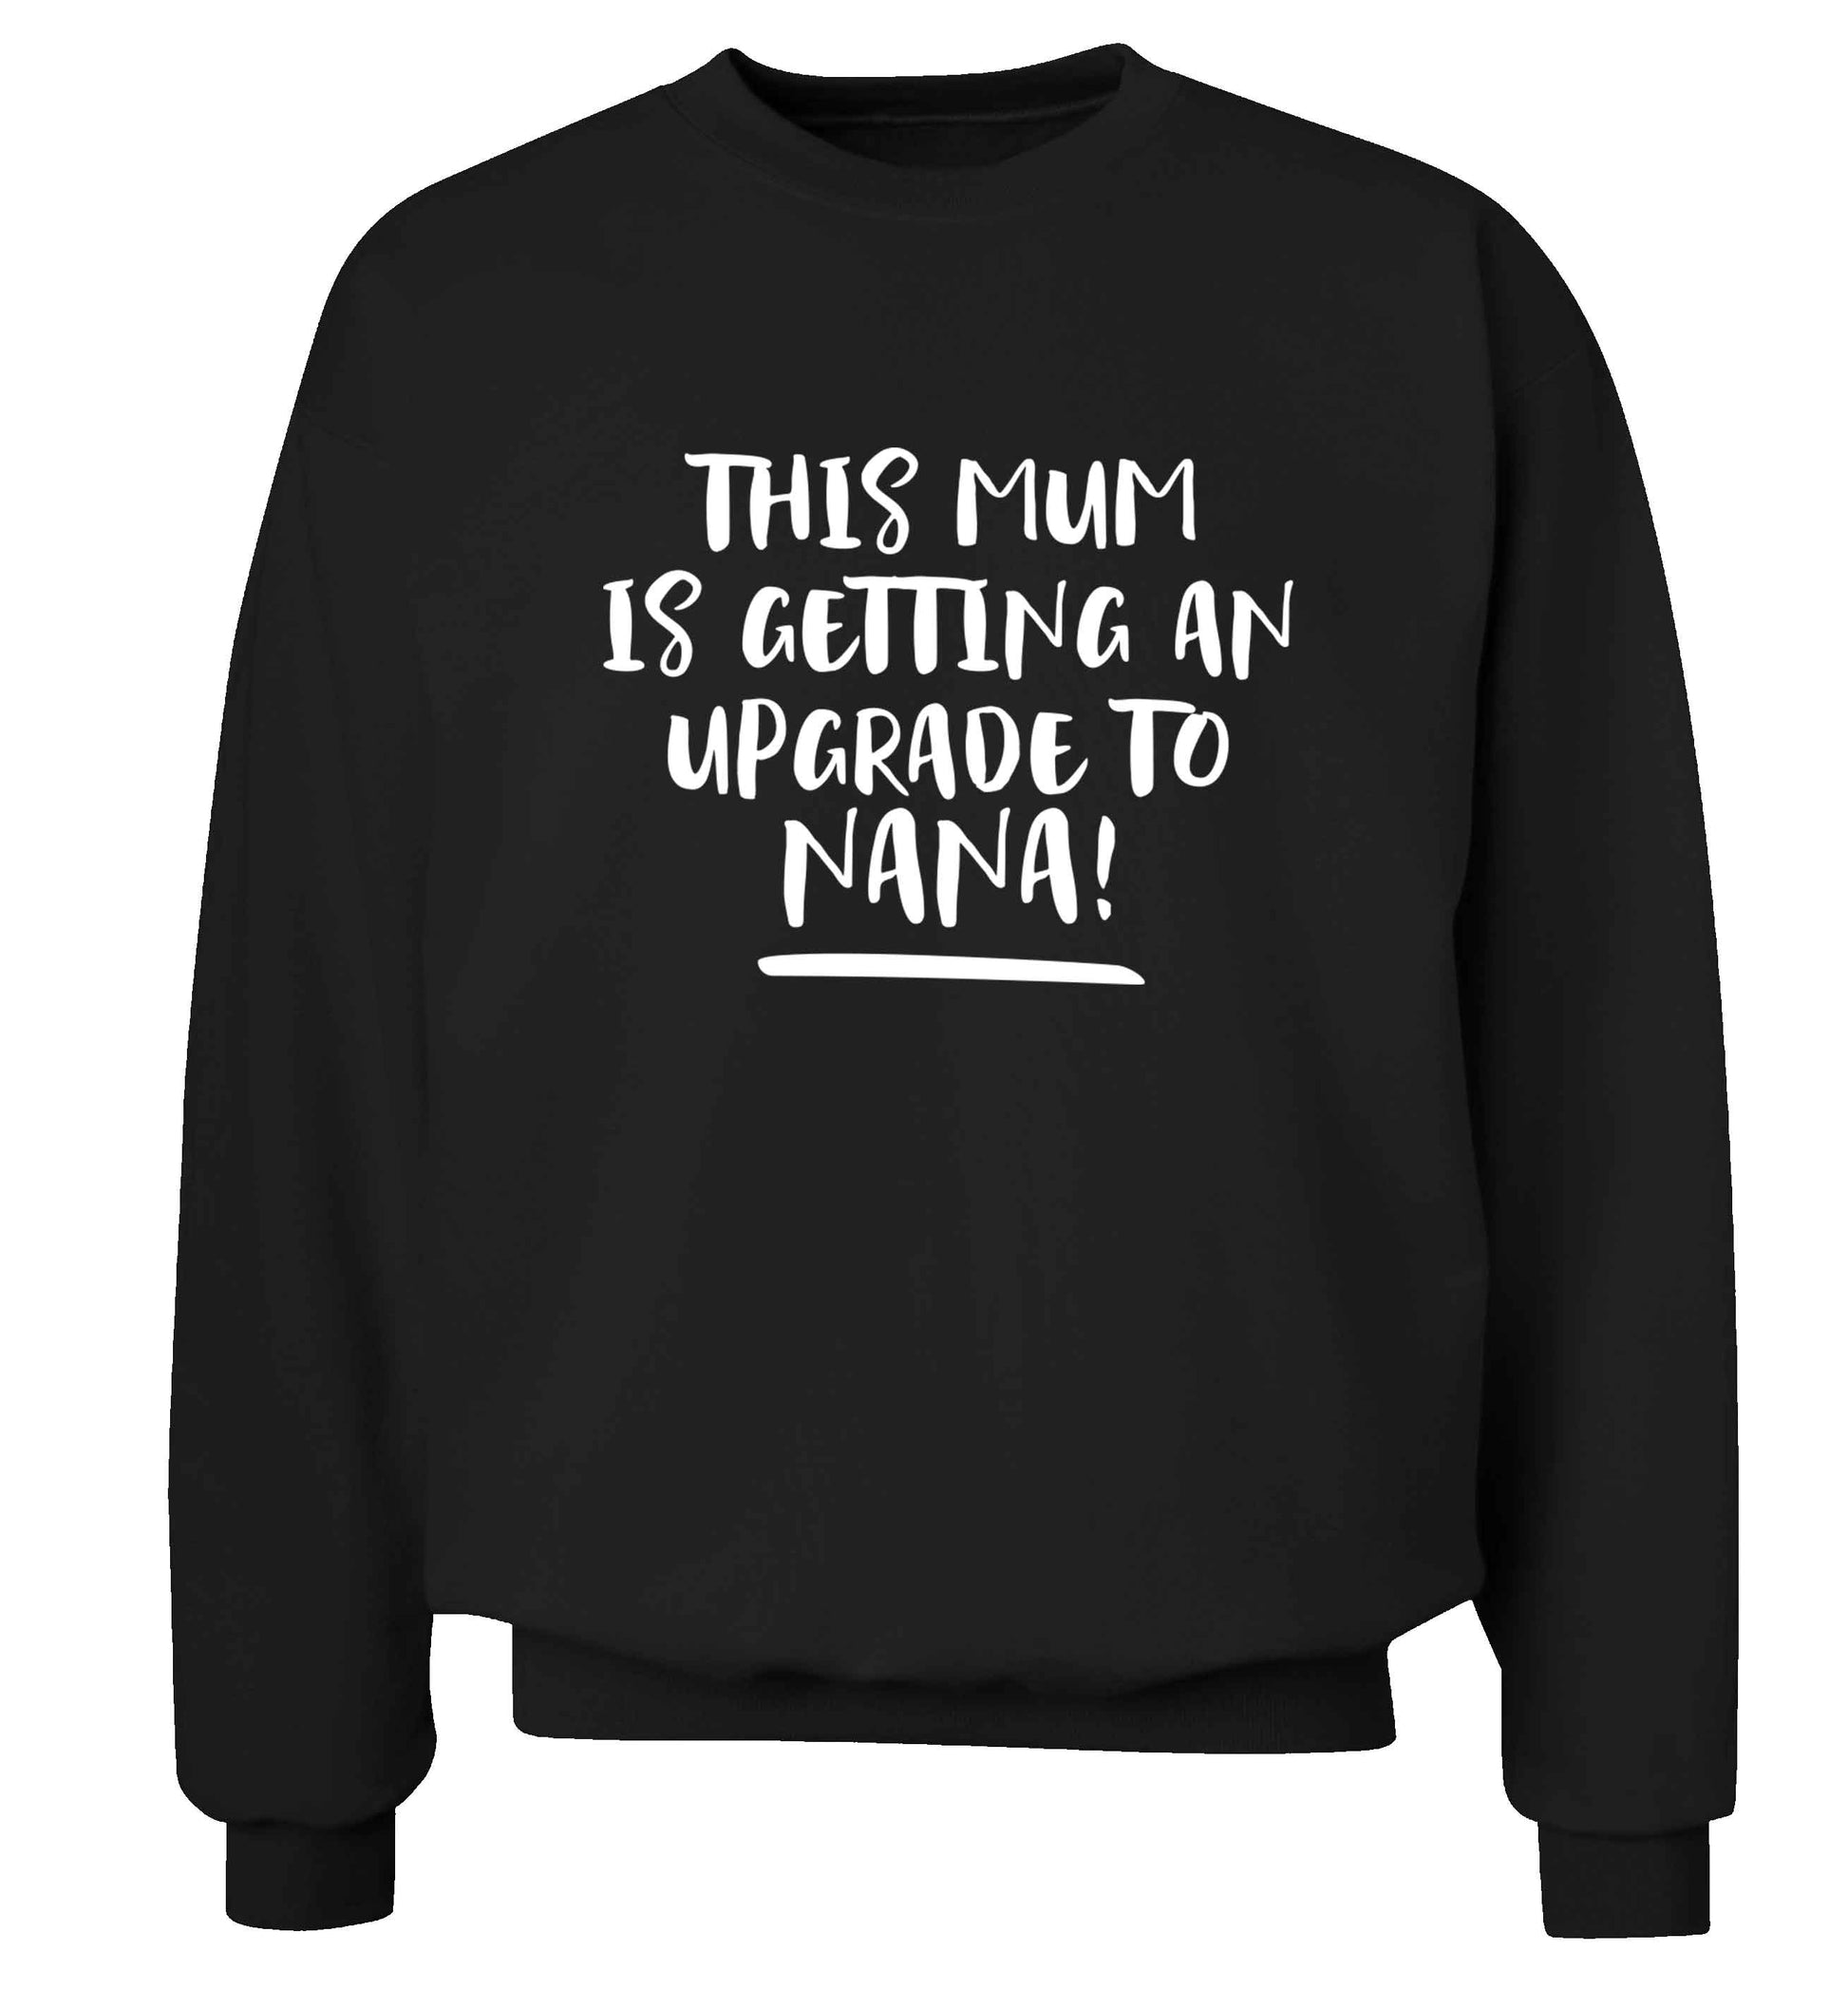 This mum is getting an upgrade to nana! Adult's unisex black Sweater 2XL